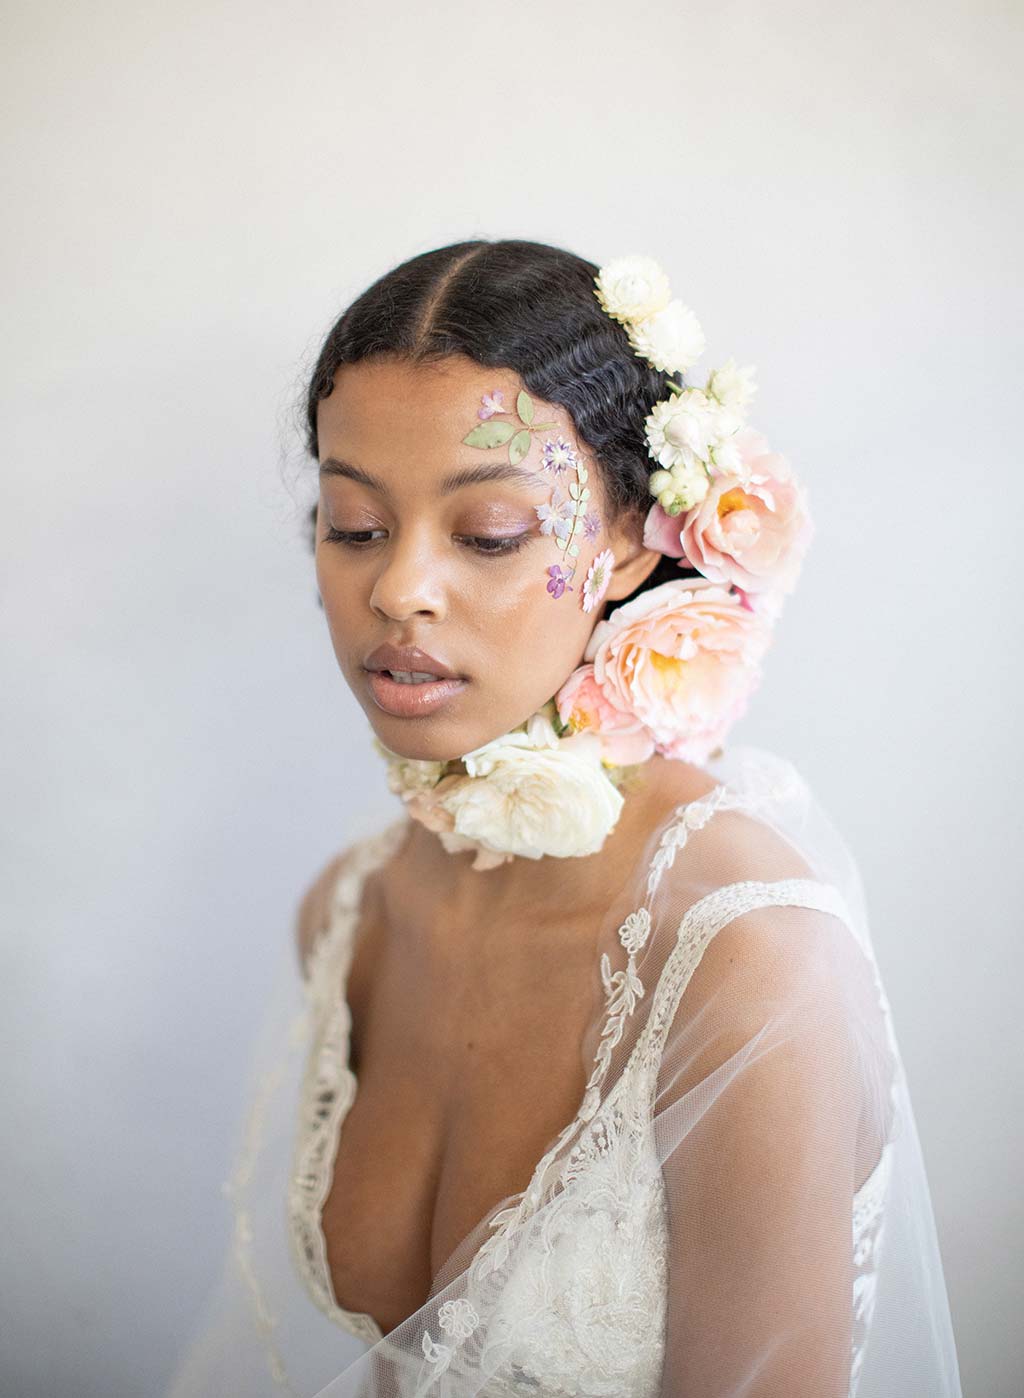 Wedding Makeup and Floral Hair styles